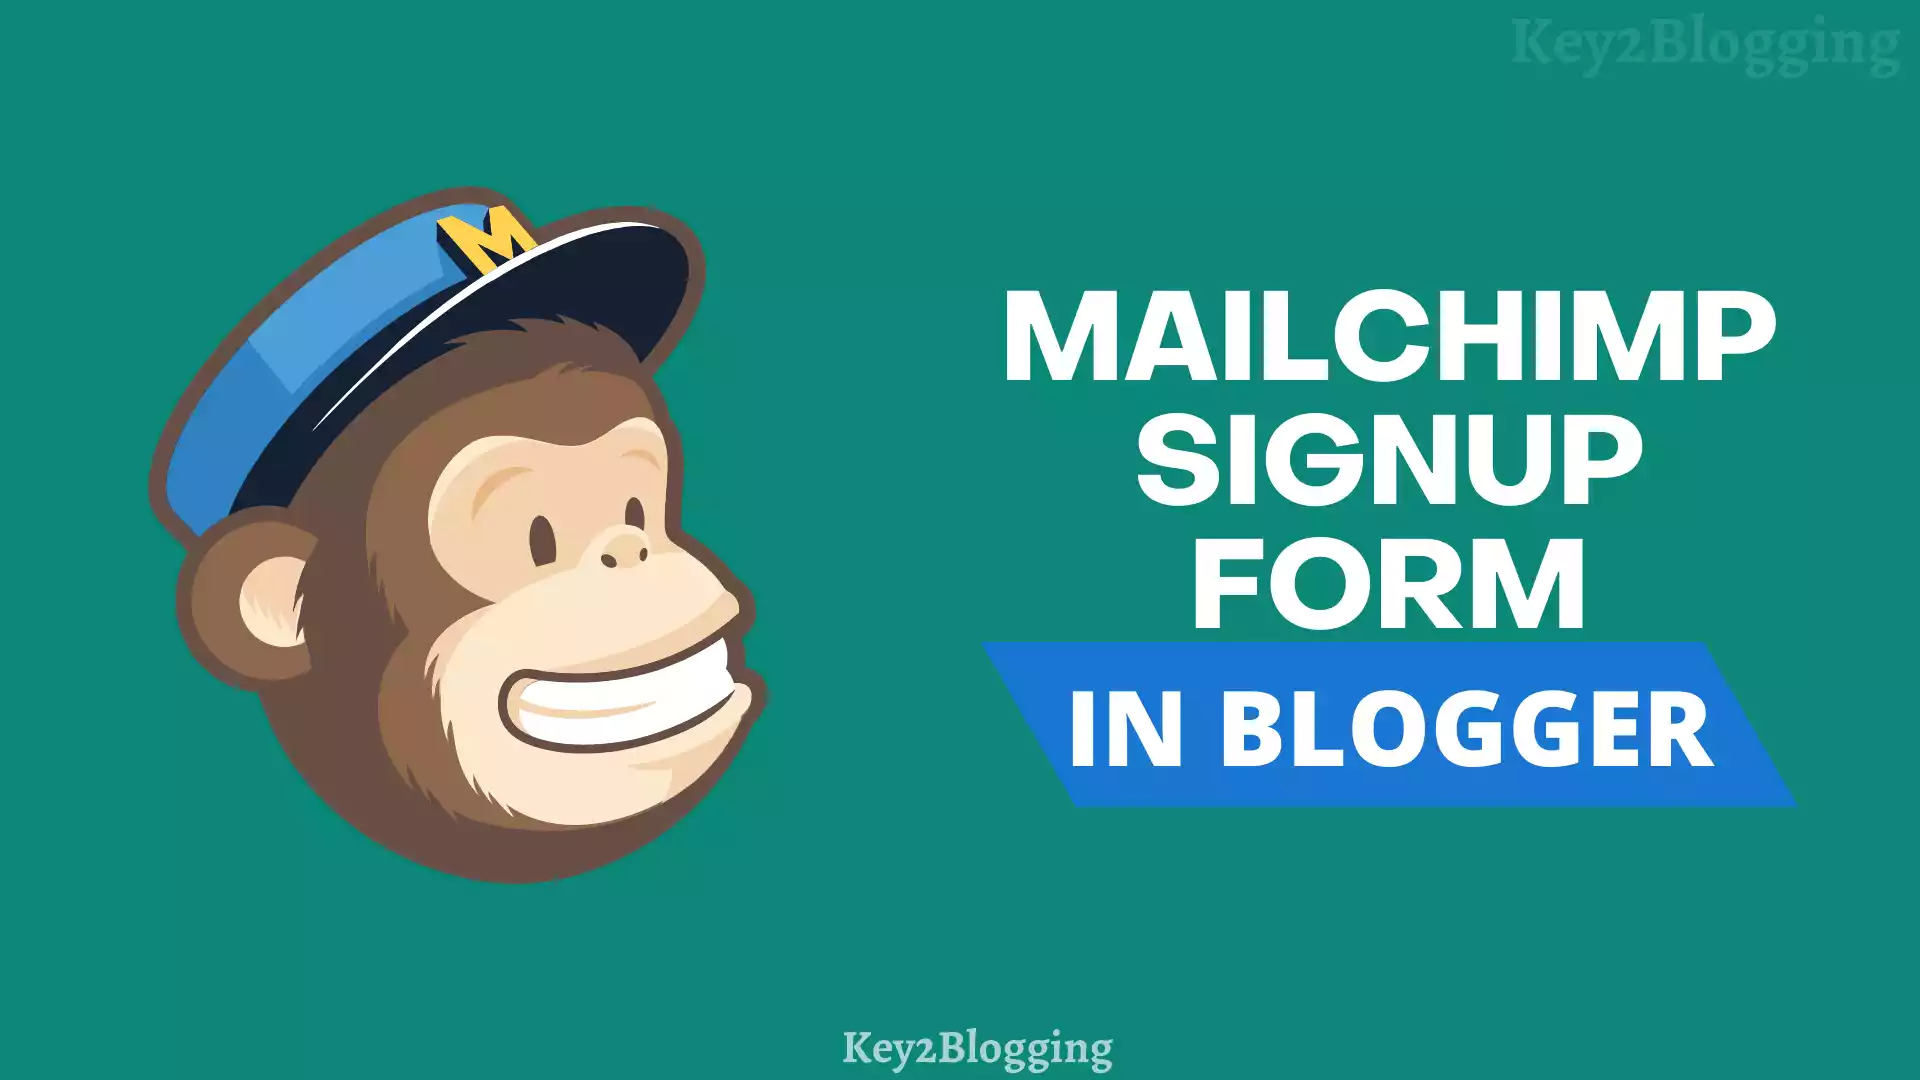 How to add MailChimp signup form in Blogger